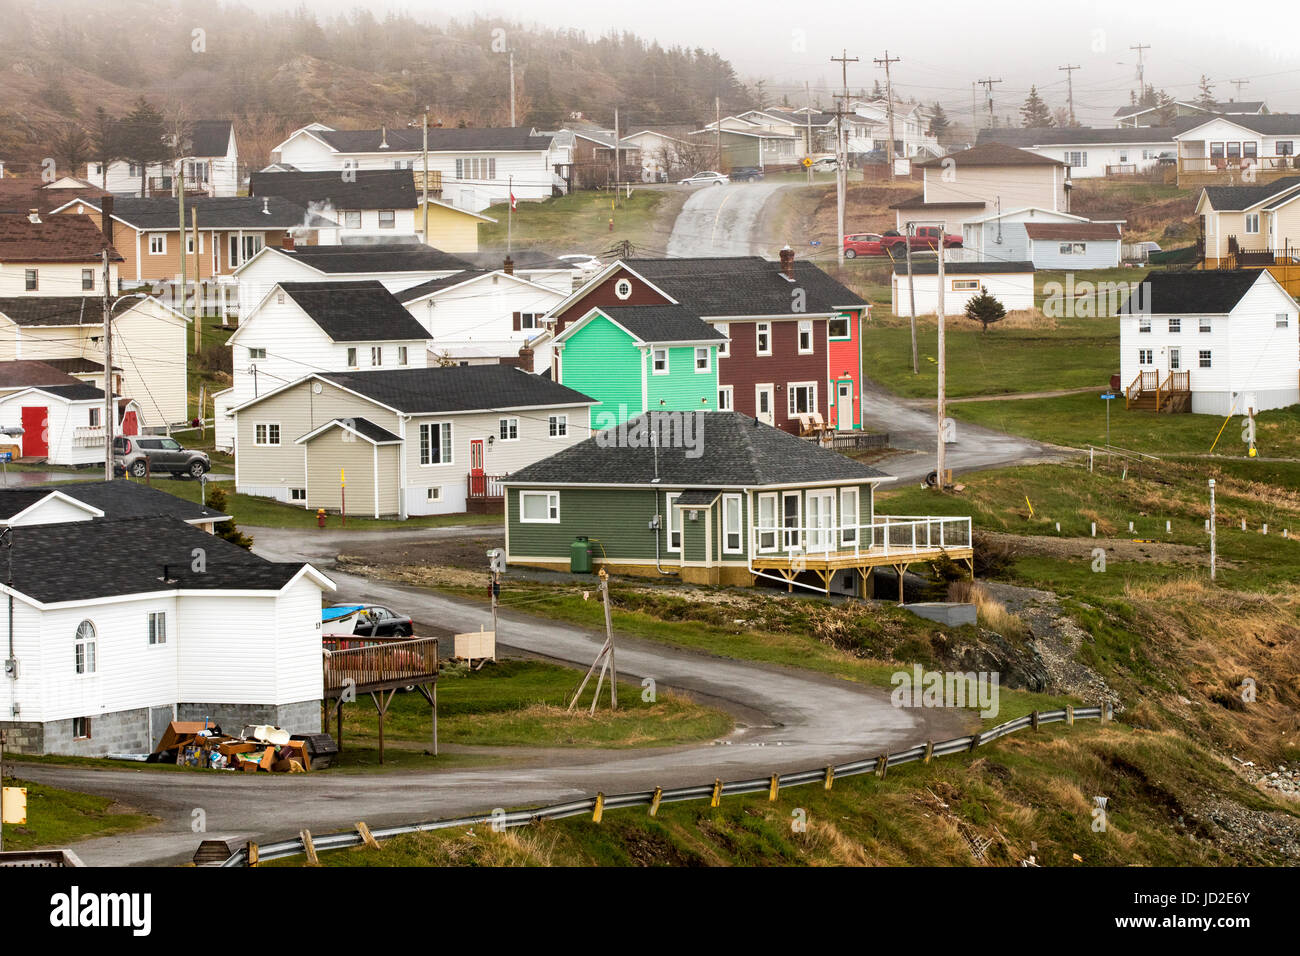 Foggy day in the town of Crow Head, Twillingate, Newfoundland, Canada Stock Photo